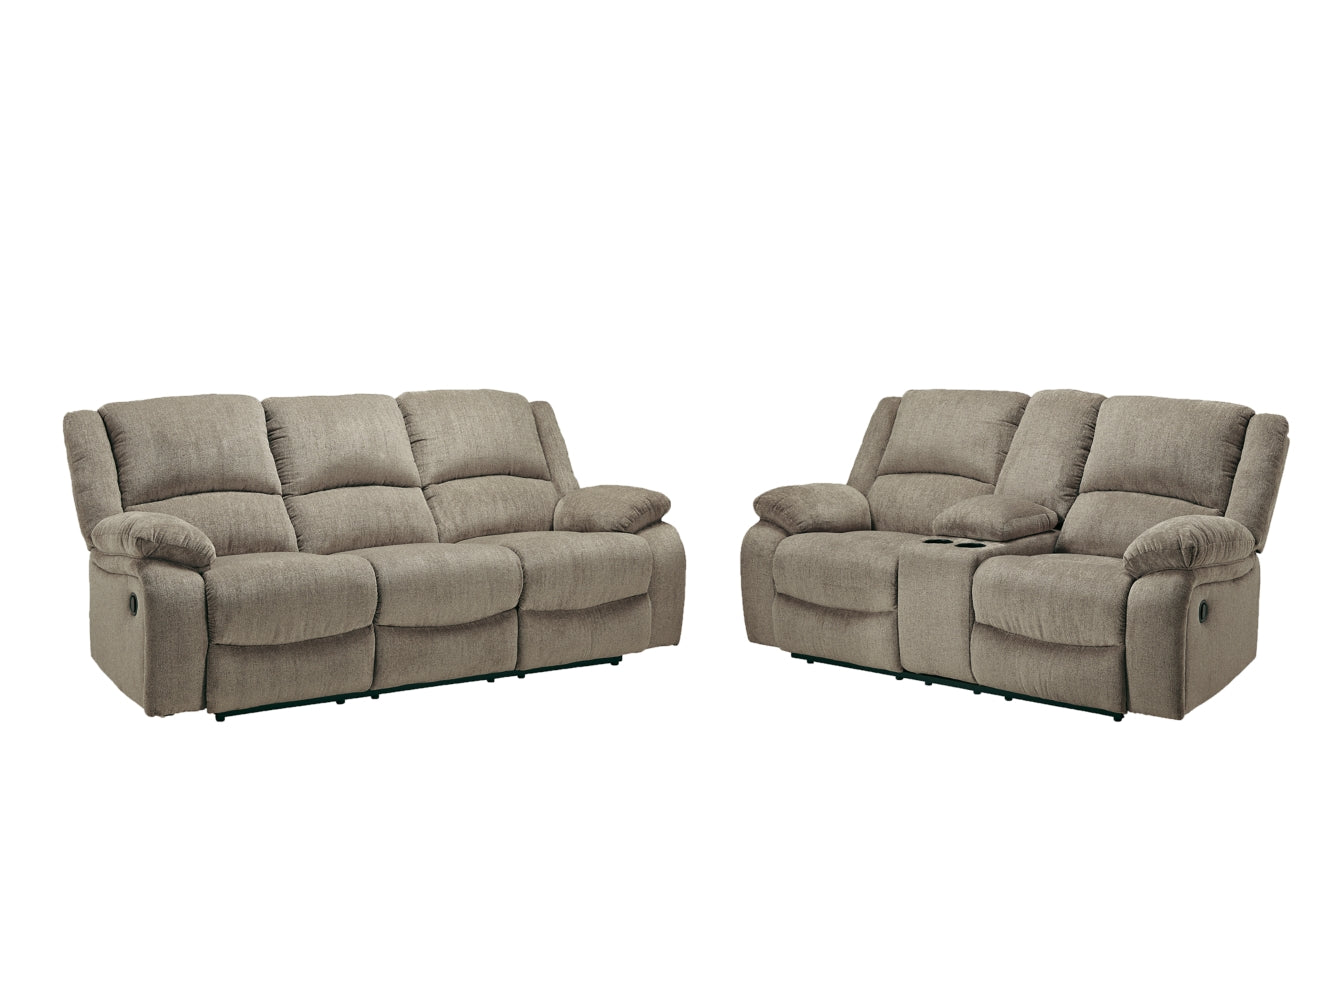 Draycoll Sofa and Loveseat - PKG007314